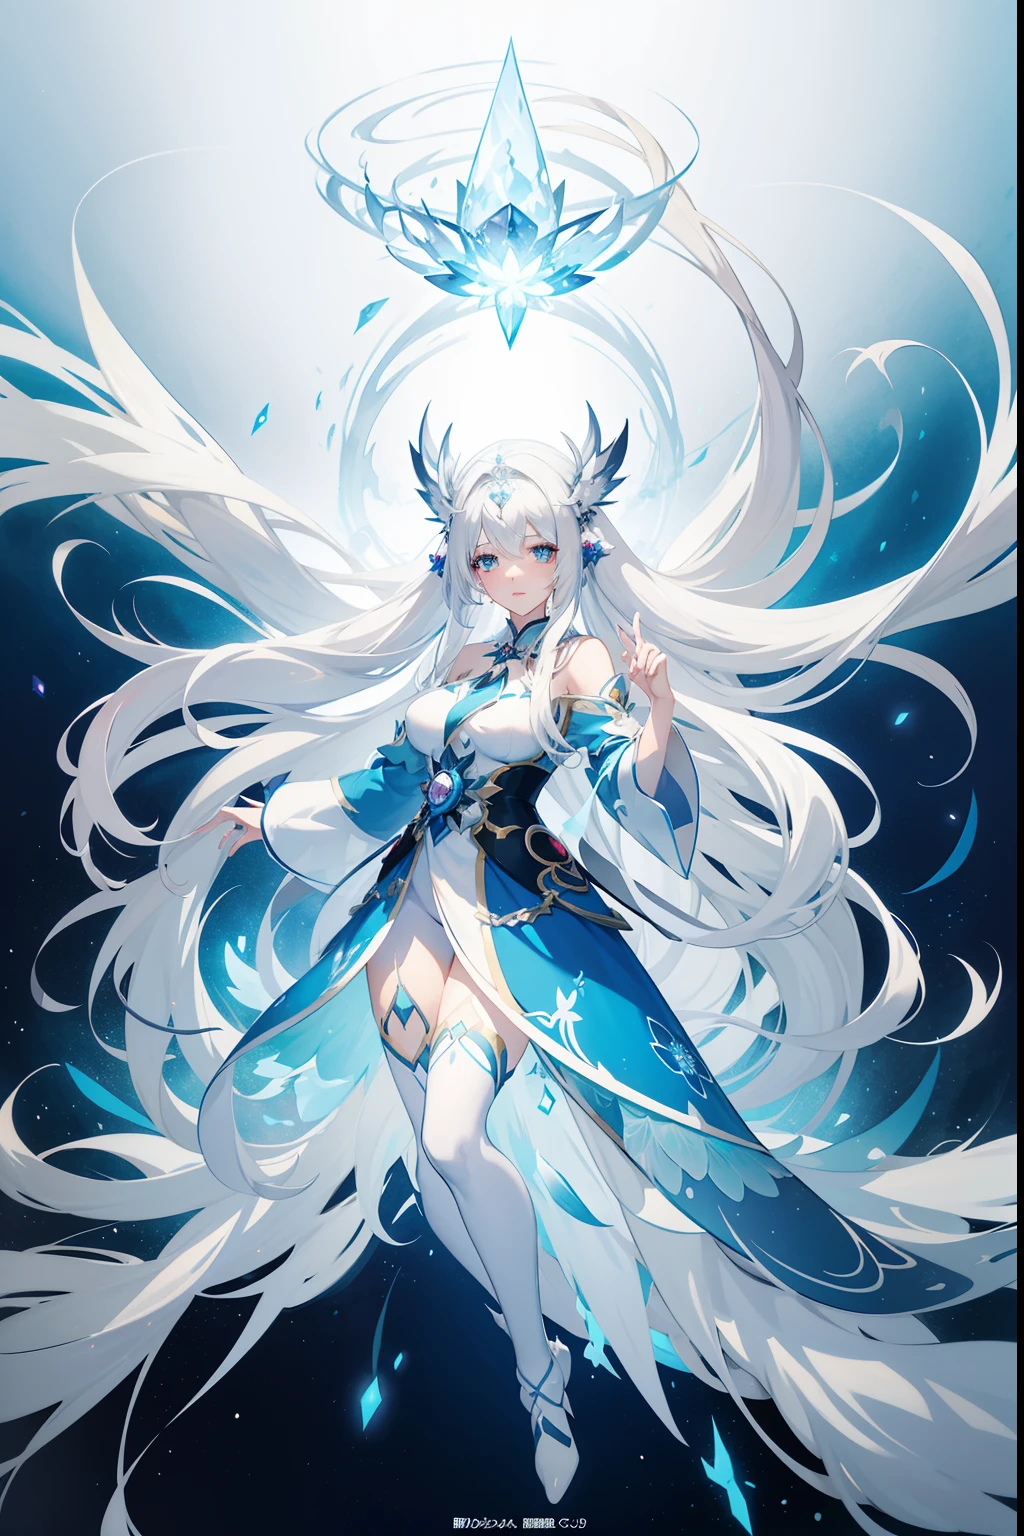 anime girl with long white hair and a blue dress in the snow, white haired deity, white hair floating in air, anime fantasy illustration, flowing white hair, beautiful young wind spirit, beautiful fantasy anime, glowing flowing hair, ethereal anime, beautiful anime artwork, beautiful digital artwork, anime fantasy artwork, ((a beautiful fantasy empress)), 2. 5 d cgi anime fantasy artwork